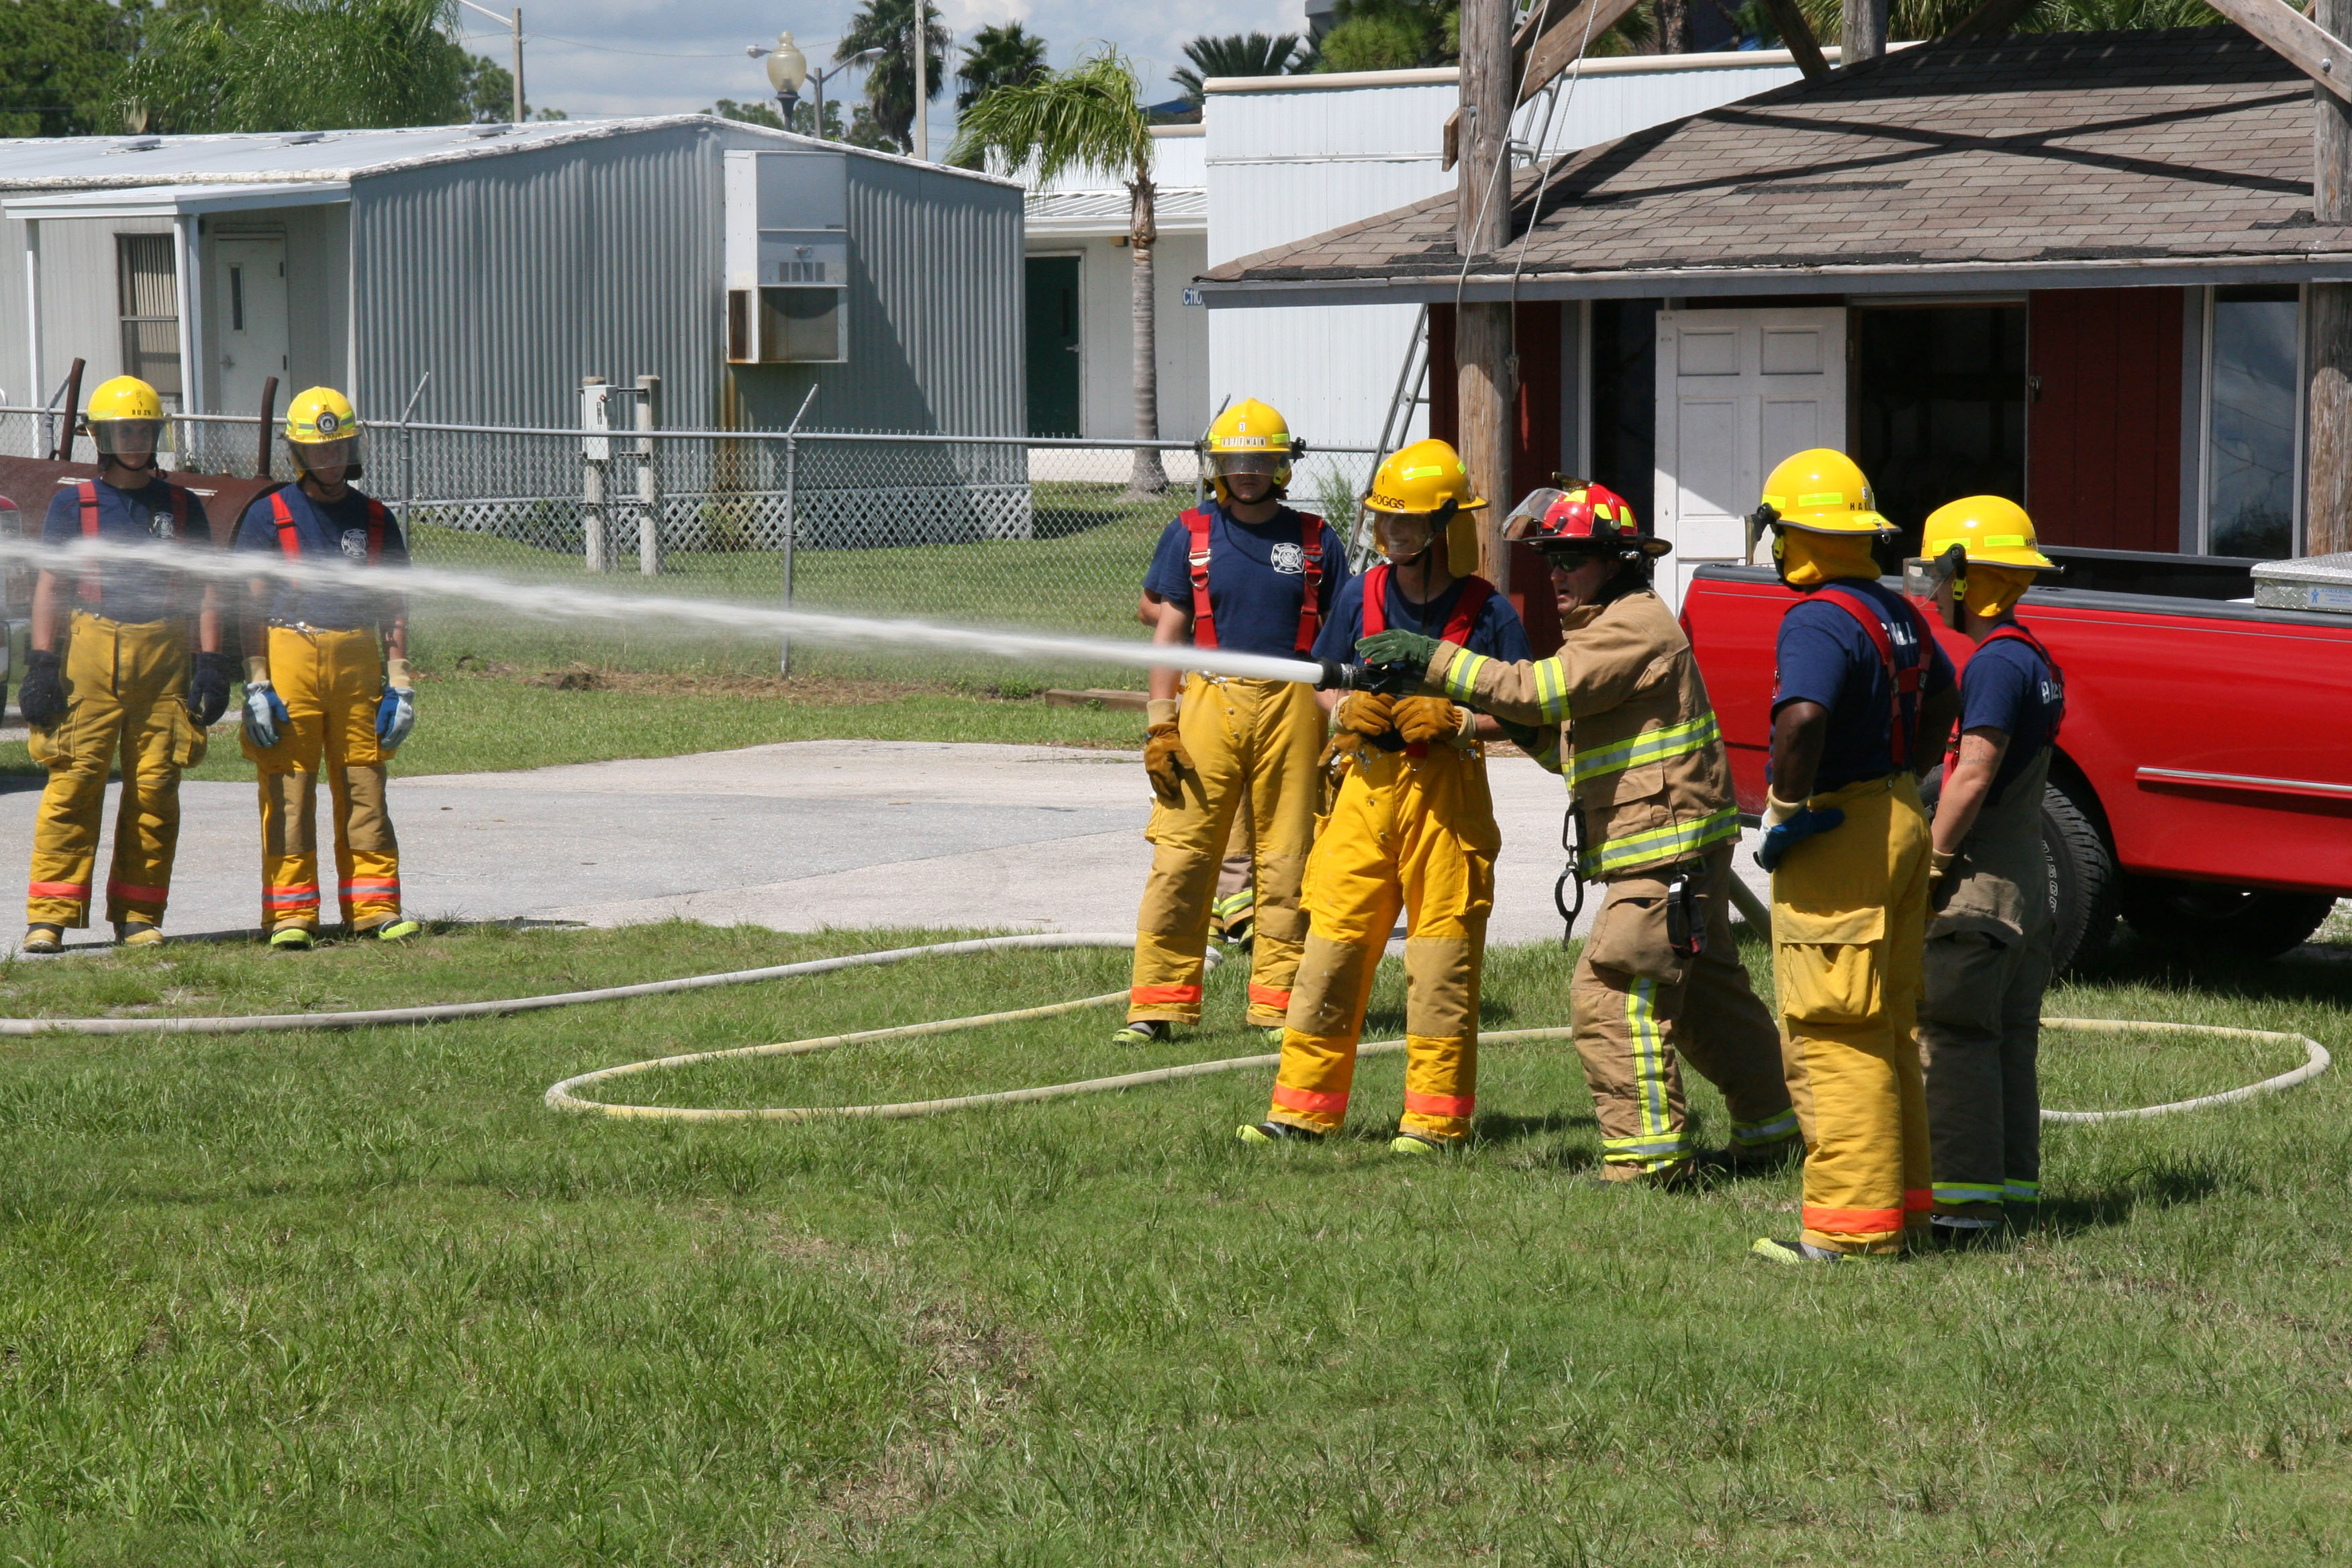 Fire students learning how to use fire hose